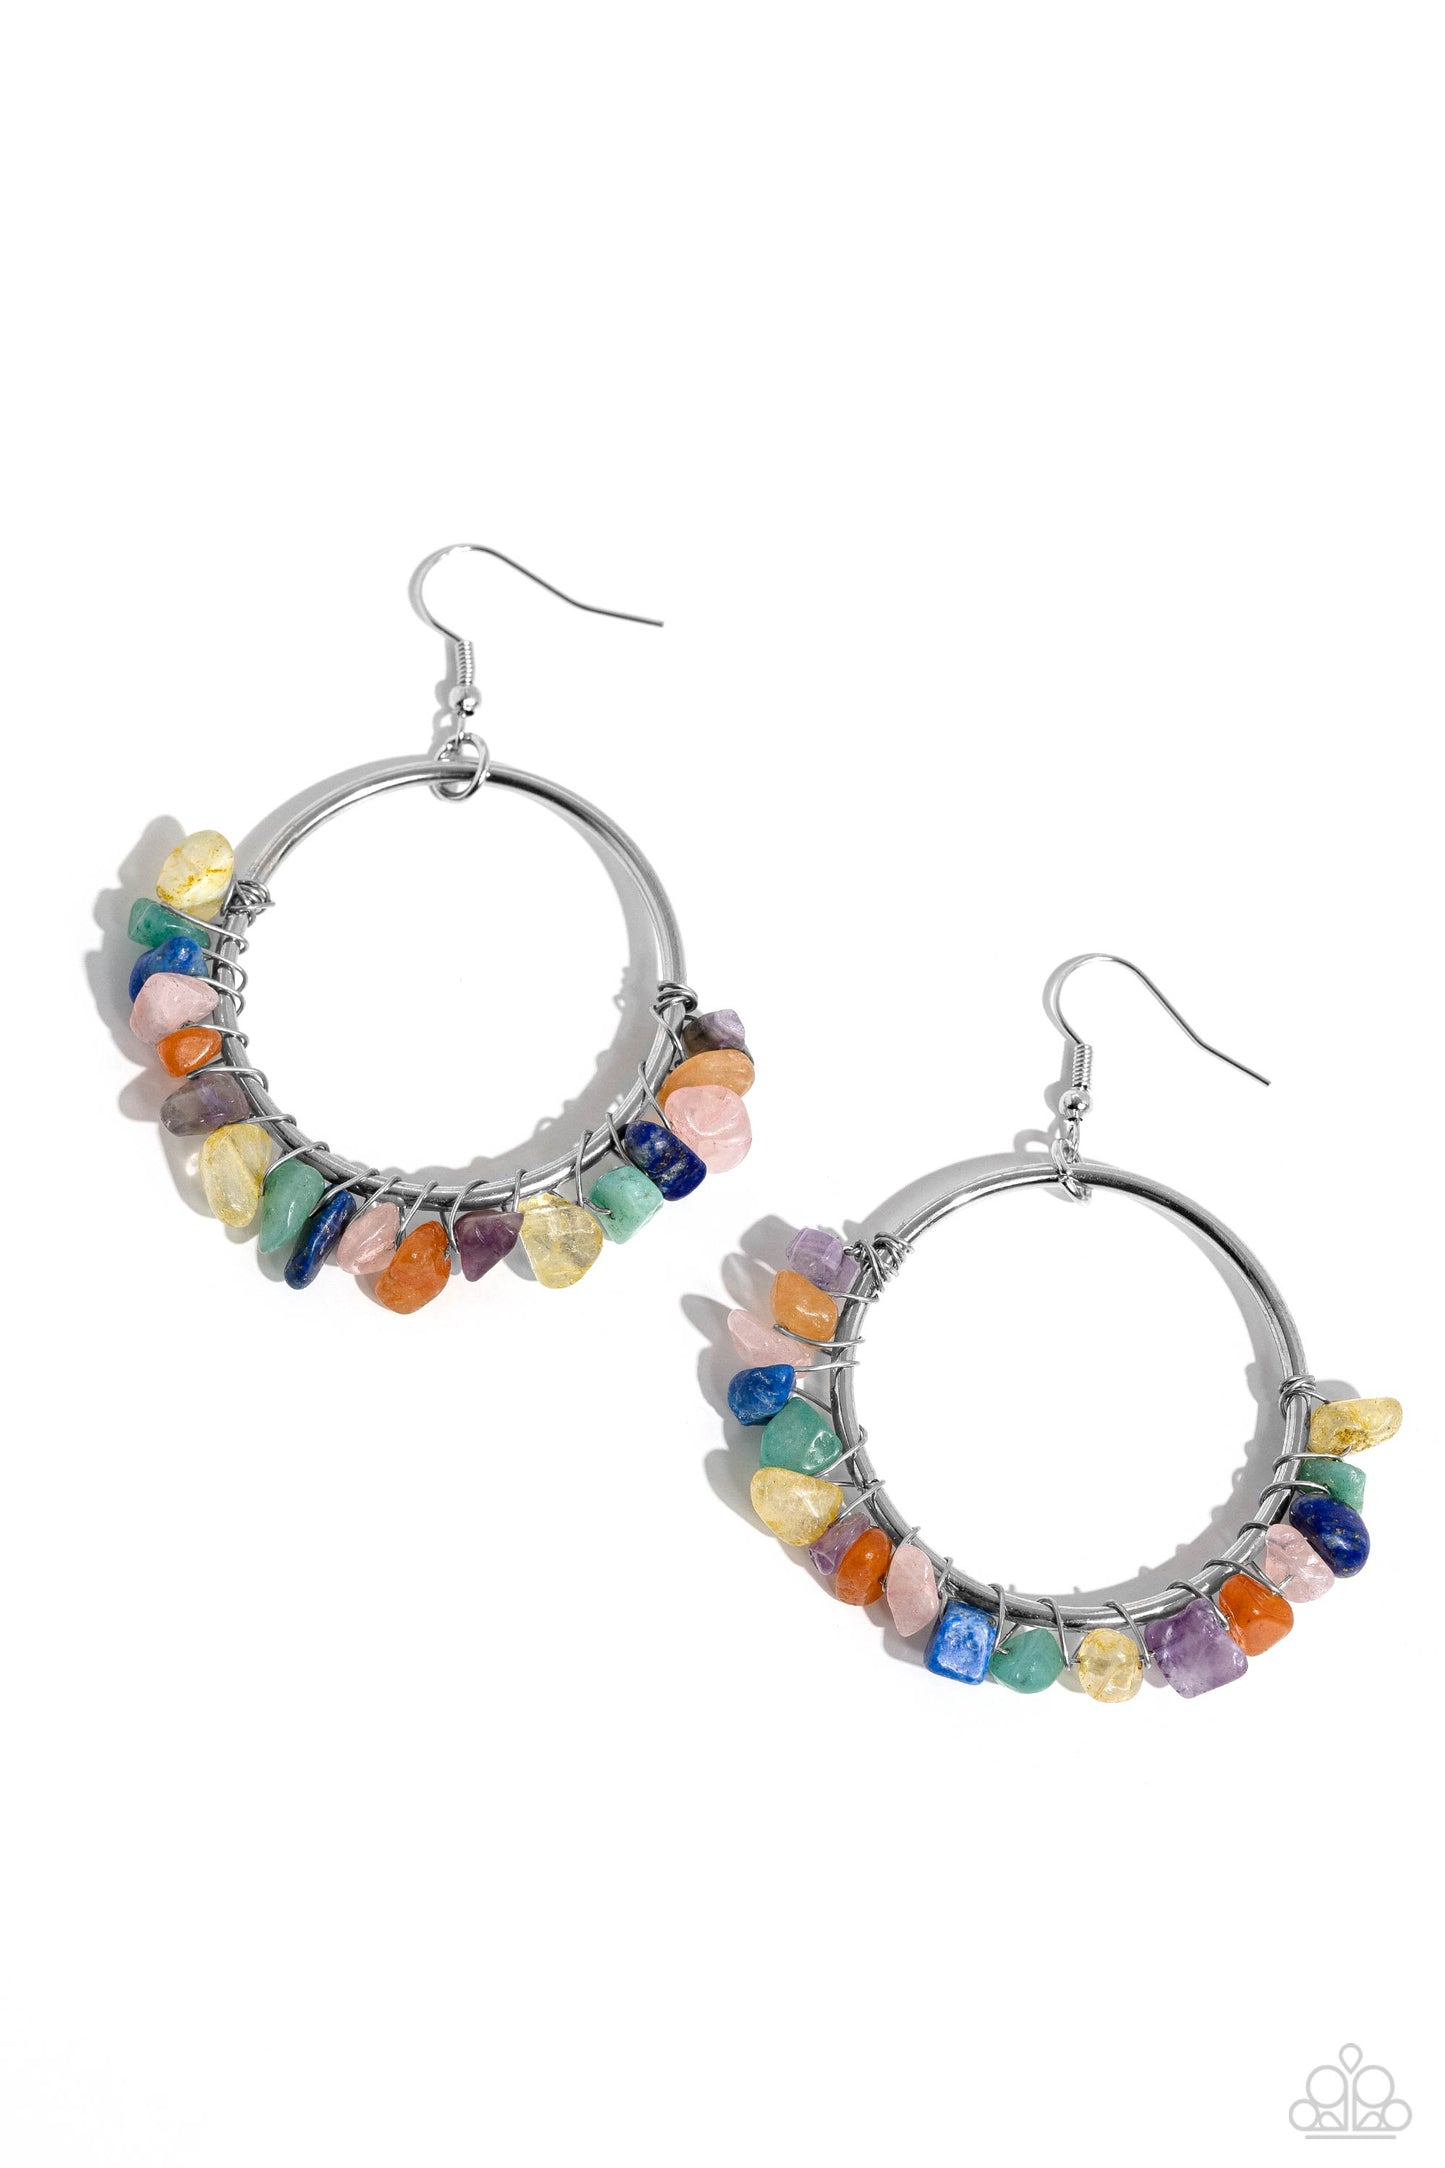 Handcrafted Habitat - Multi Color Earrings - Paparazzi Accessories - A colorful collection of chiseled jade, amethyst, lapis, turquoise, rose quartz, and other multicolored stones are wrapped along the bottom of a shiny, silver hoop by shimmery silver wire for a handcrafted, earthy finish.